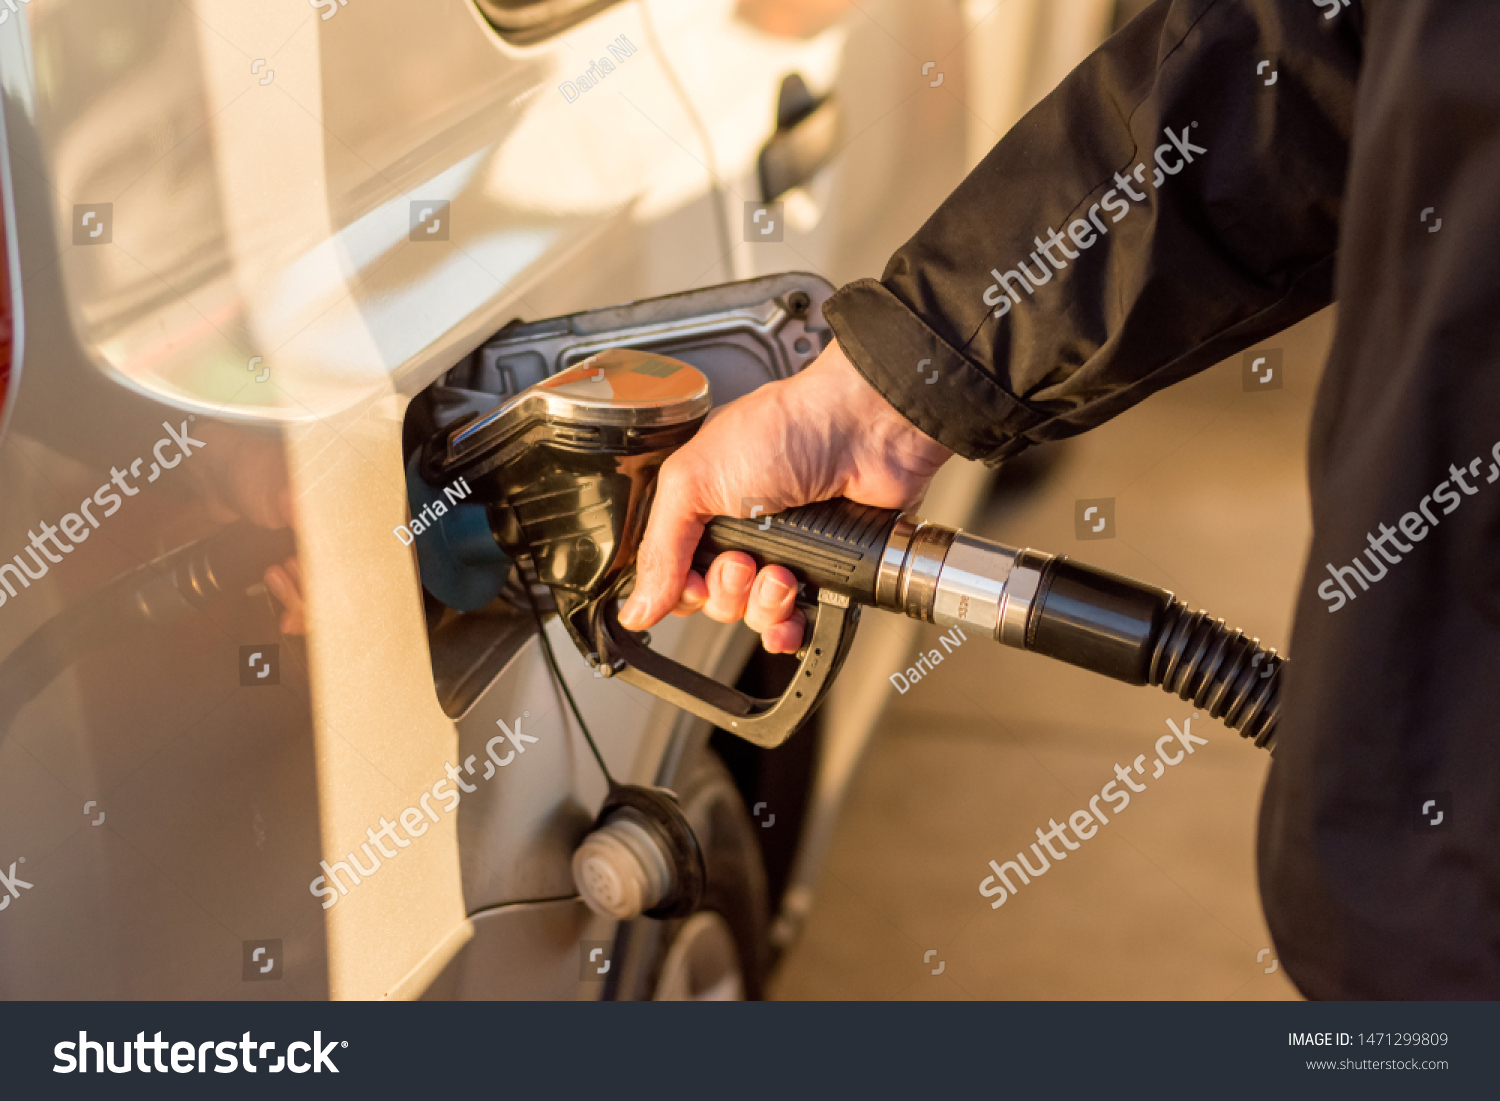 A man hand holding pump filling gasoline. Pumping petrol into the tank. A car refuel on gas station #1471299809